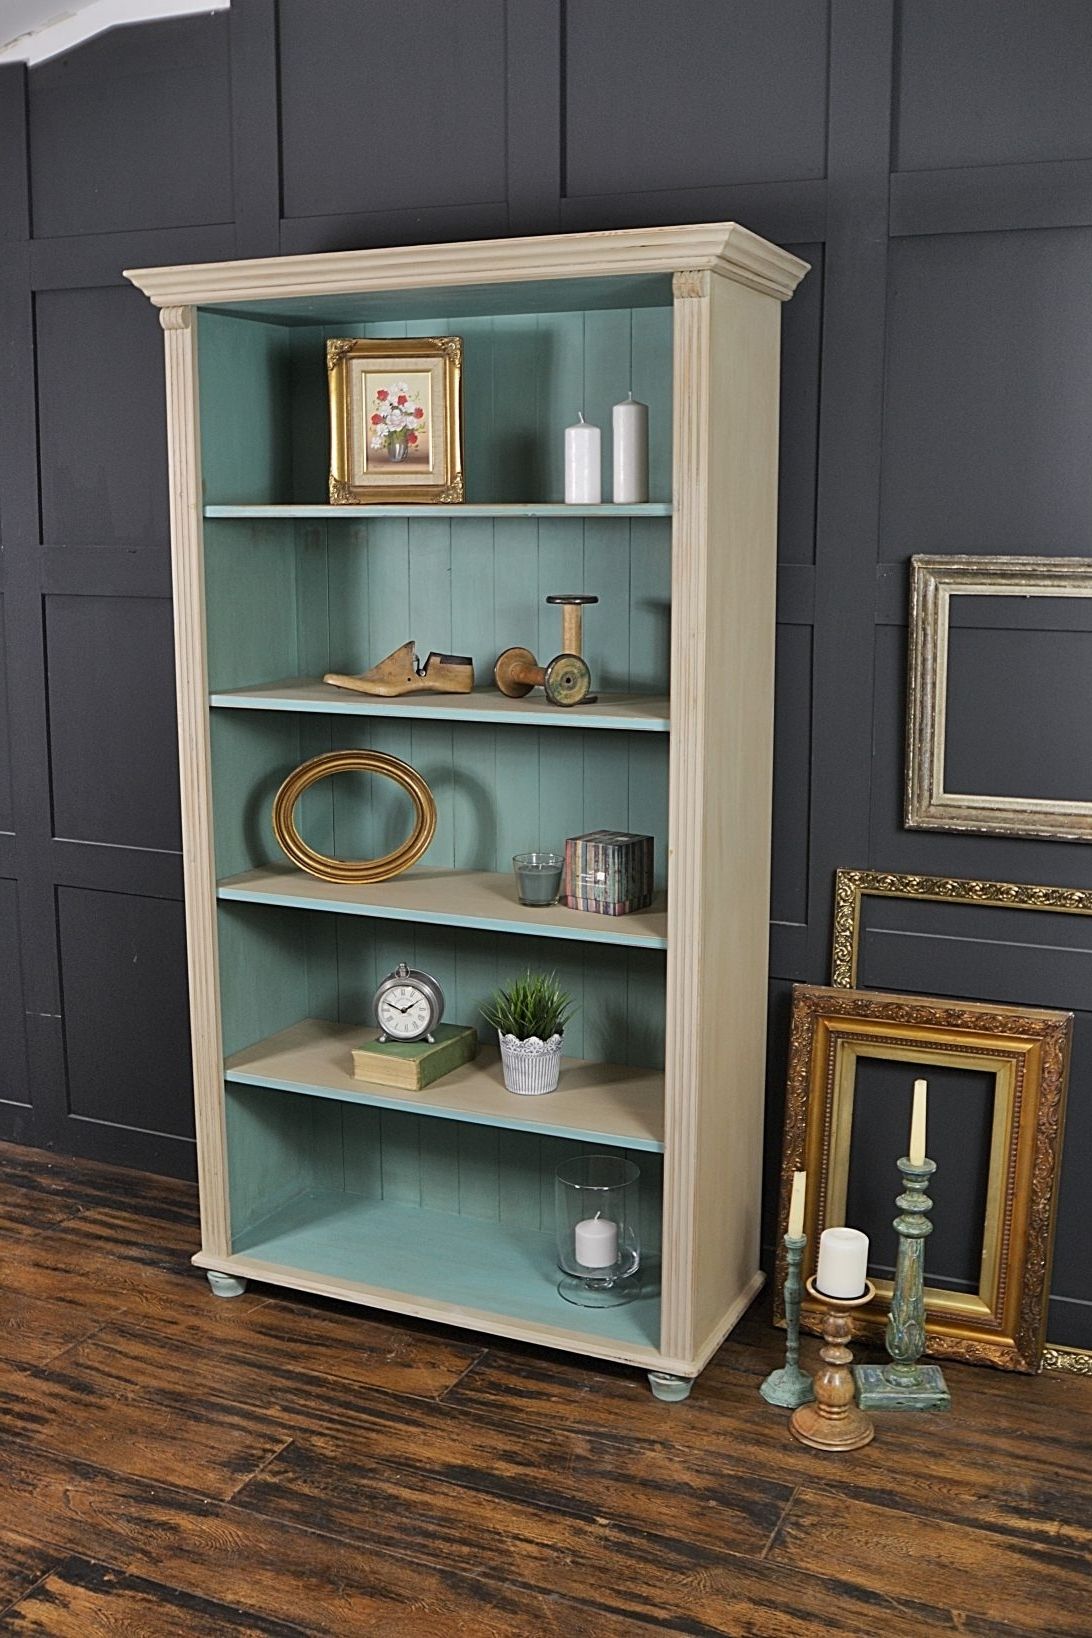 This Farmhouse Pinecase Has Been Painted In Annie Sloan Remarkable Pertaining To 2017 Painted Bookcases (View 8 of 15)